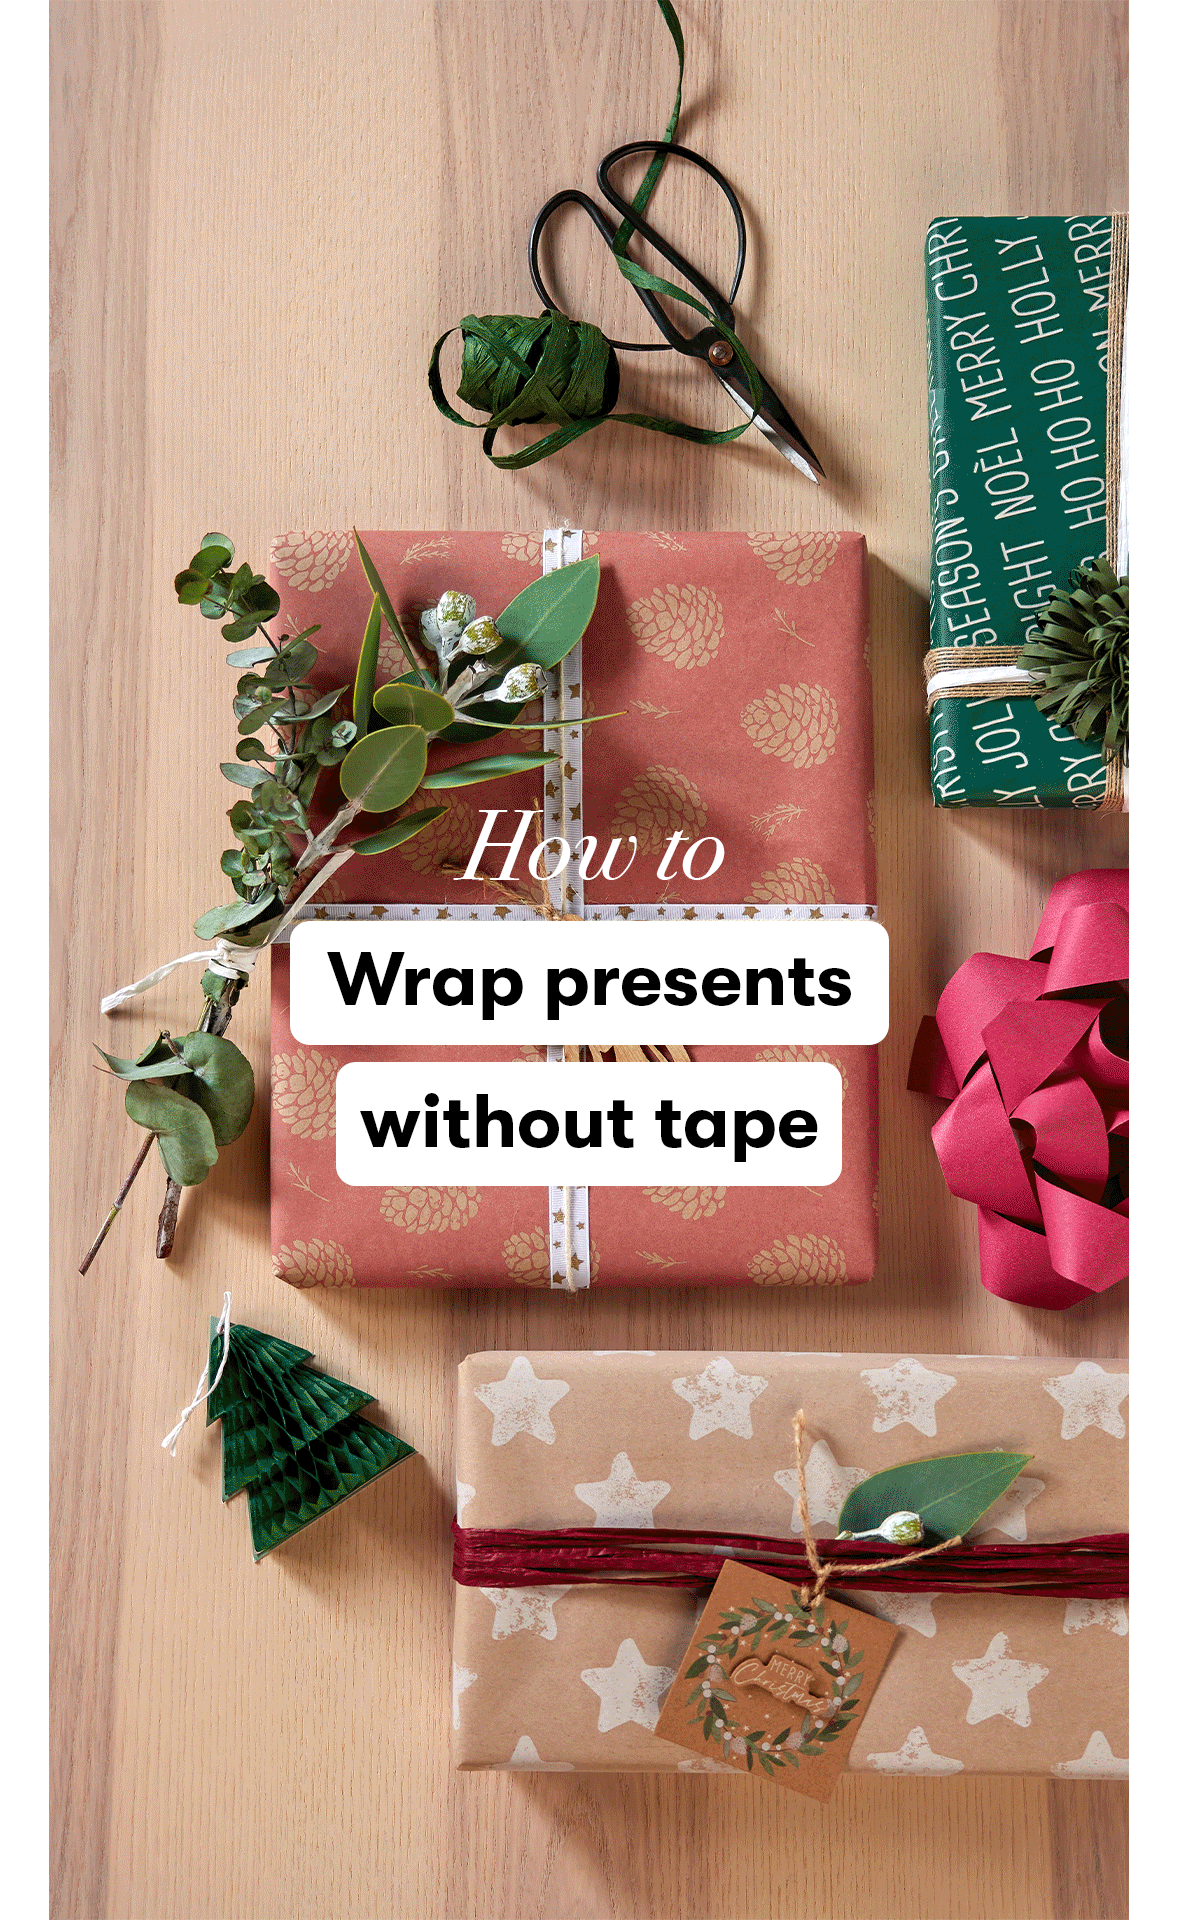 How to Wrap Presents without Tape